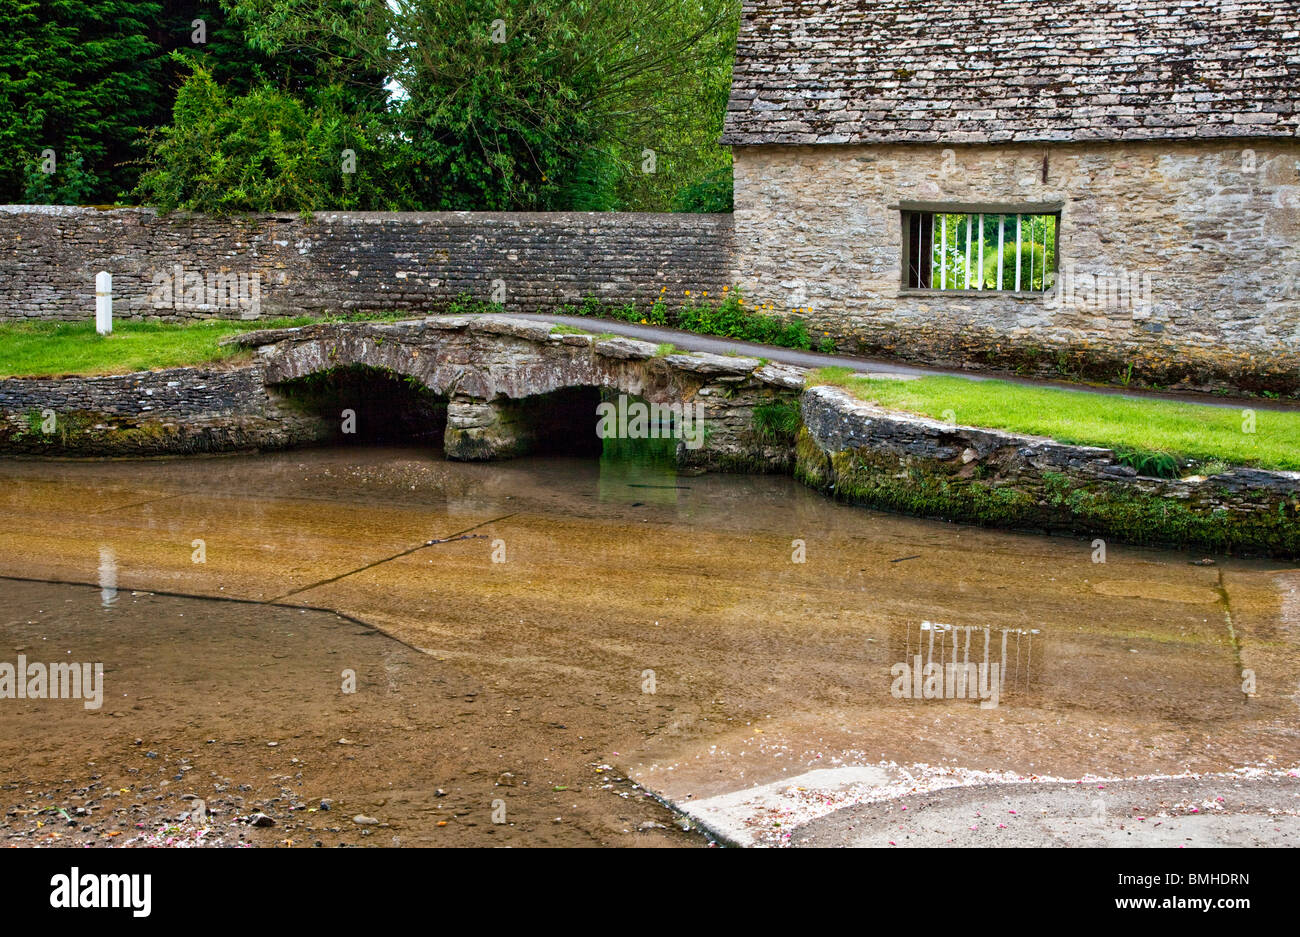 The ford and stone bridge in the pretty Cotswold village of Shilton, Oxfordshire, England, UK Stock Photo